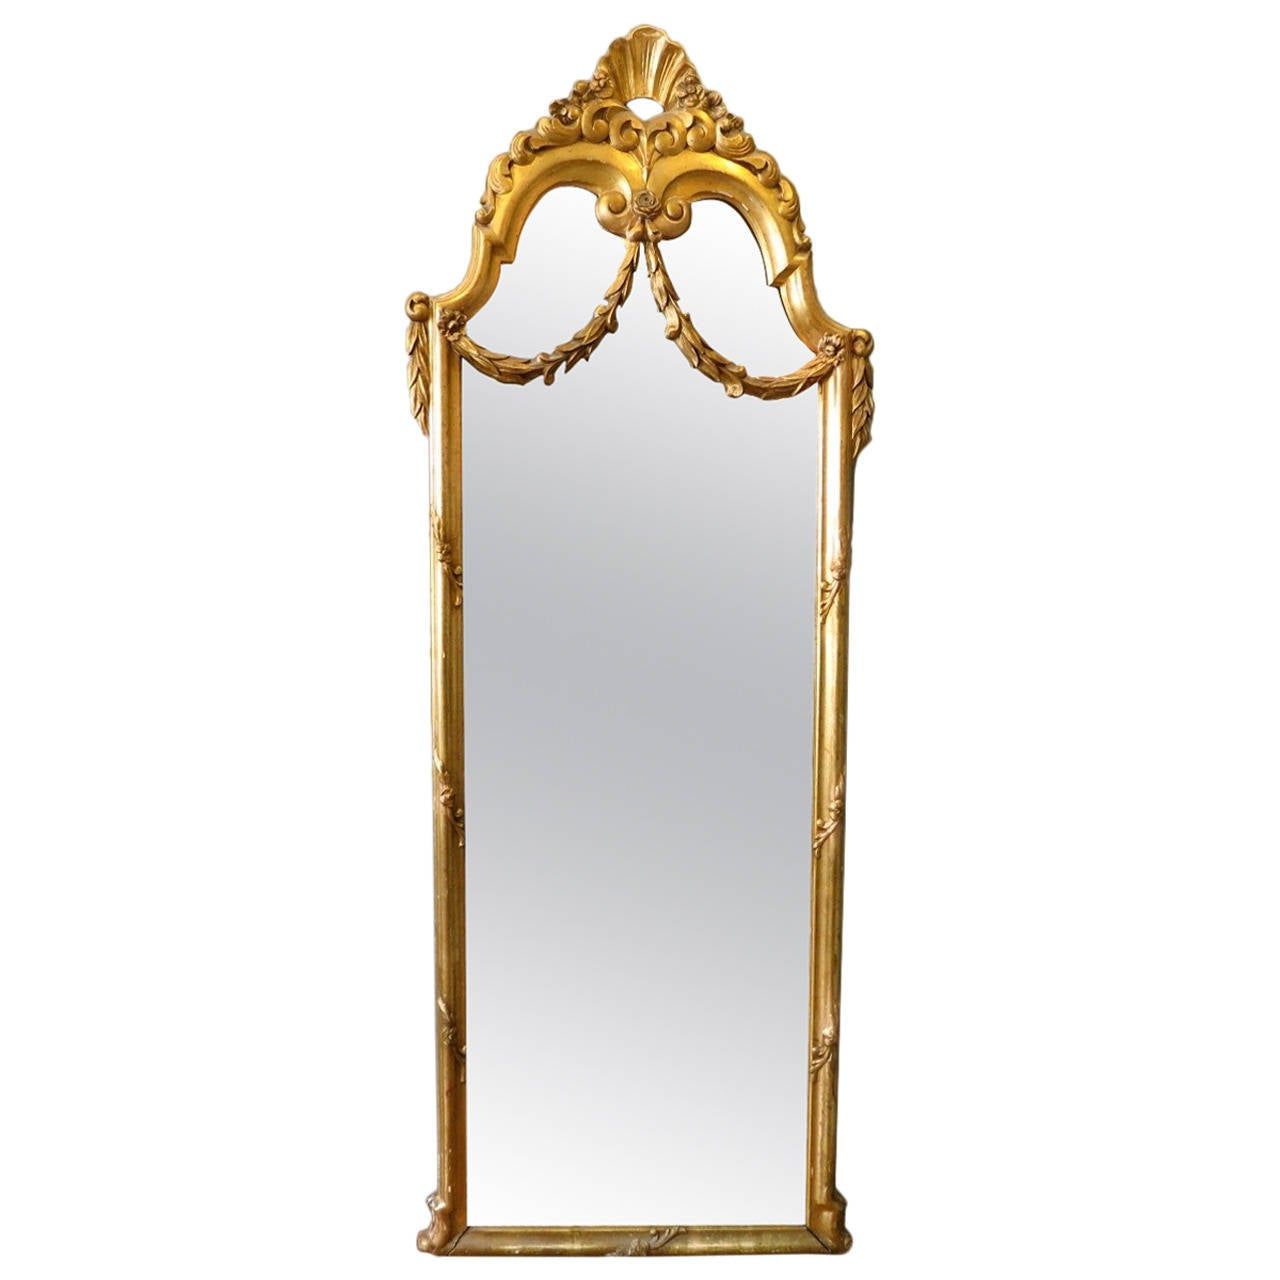 Antique Brass Standing Mirrors With Regard To Most Recently Released Antique French Gold Gilt Floor Standing Mirror At 1stdibs (View 14 of 15)